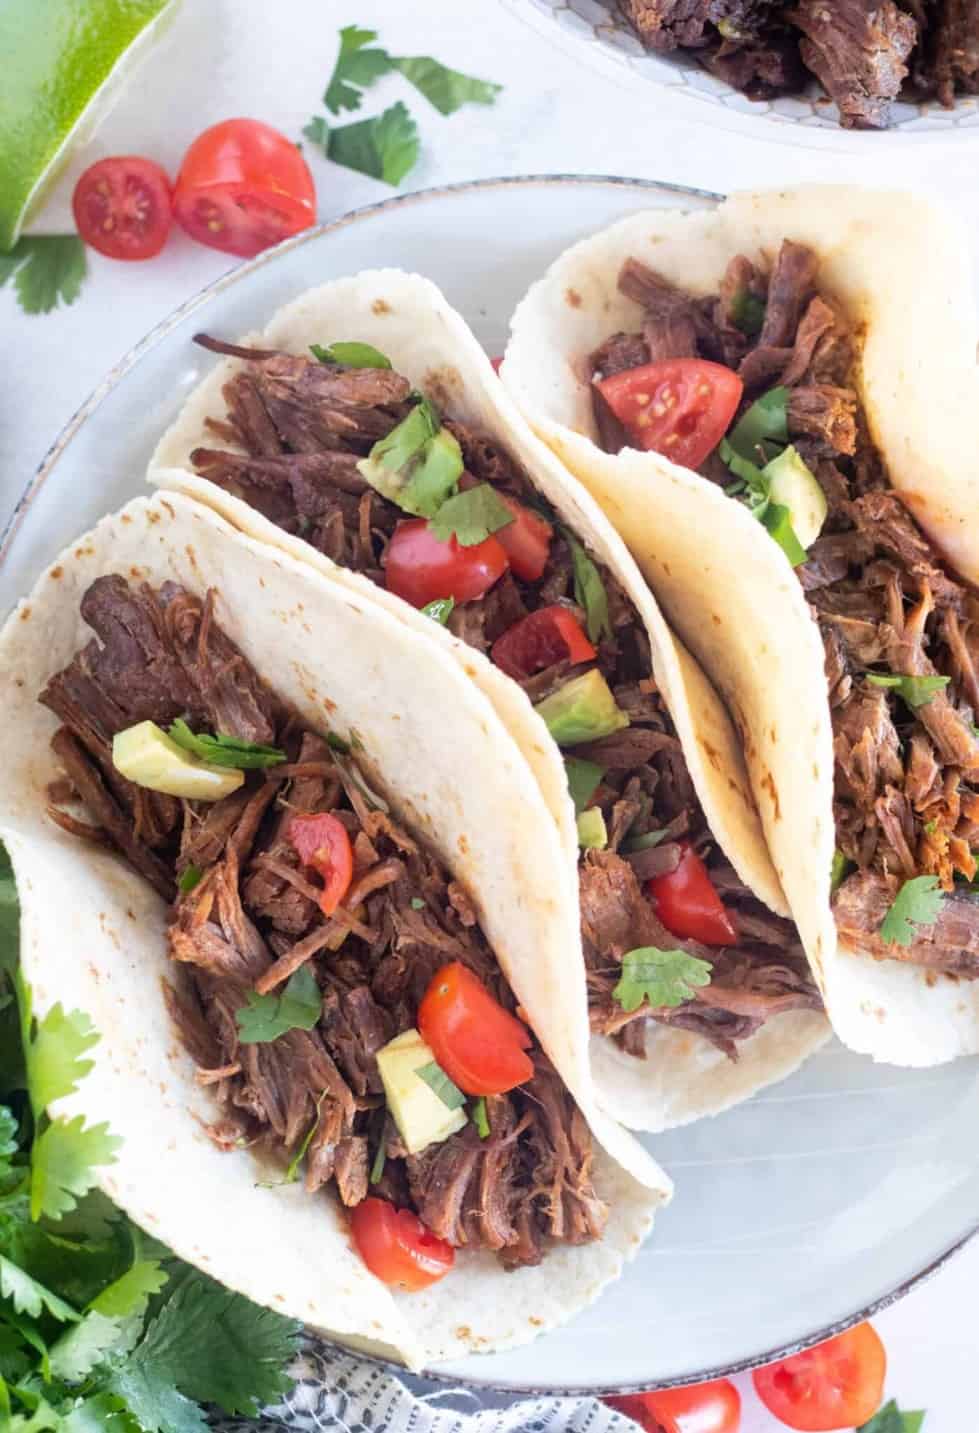 Three soft tacos filled with shredded beef on a plate.